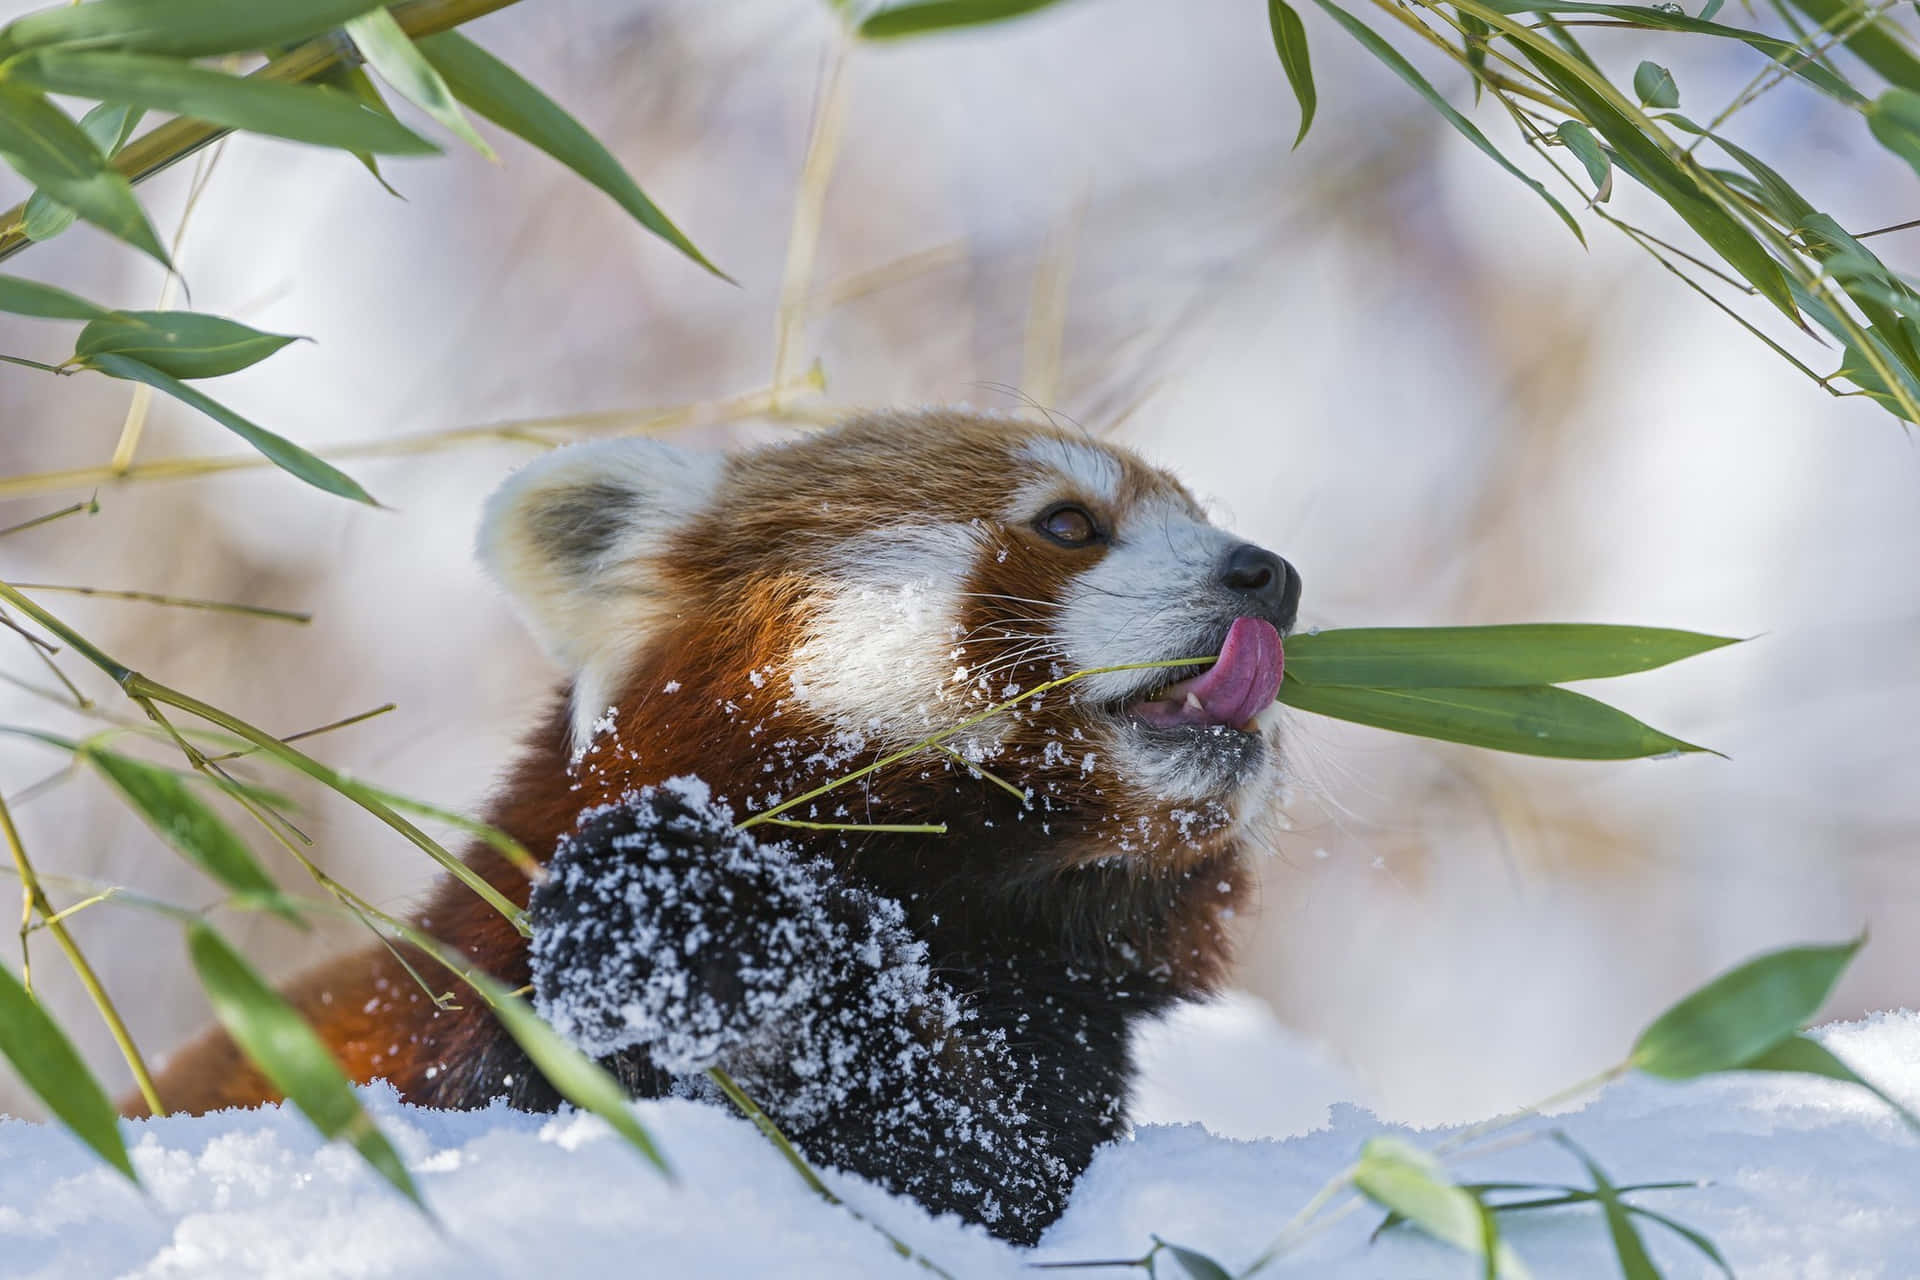 A red panda chillin' in the bamboo forest.